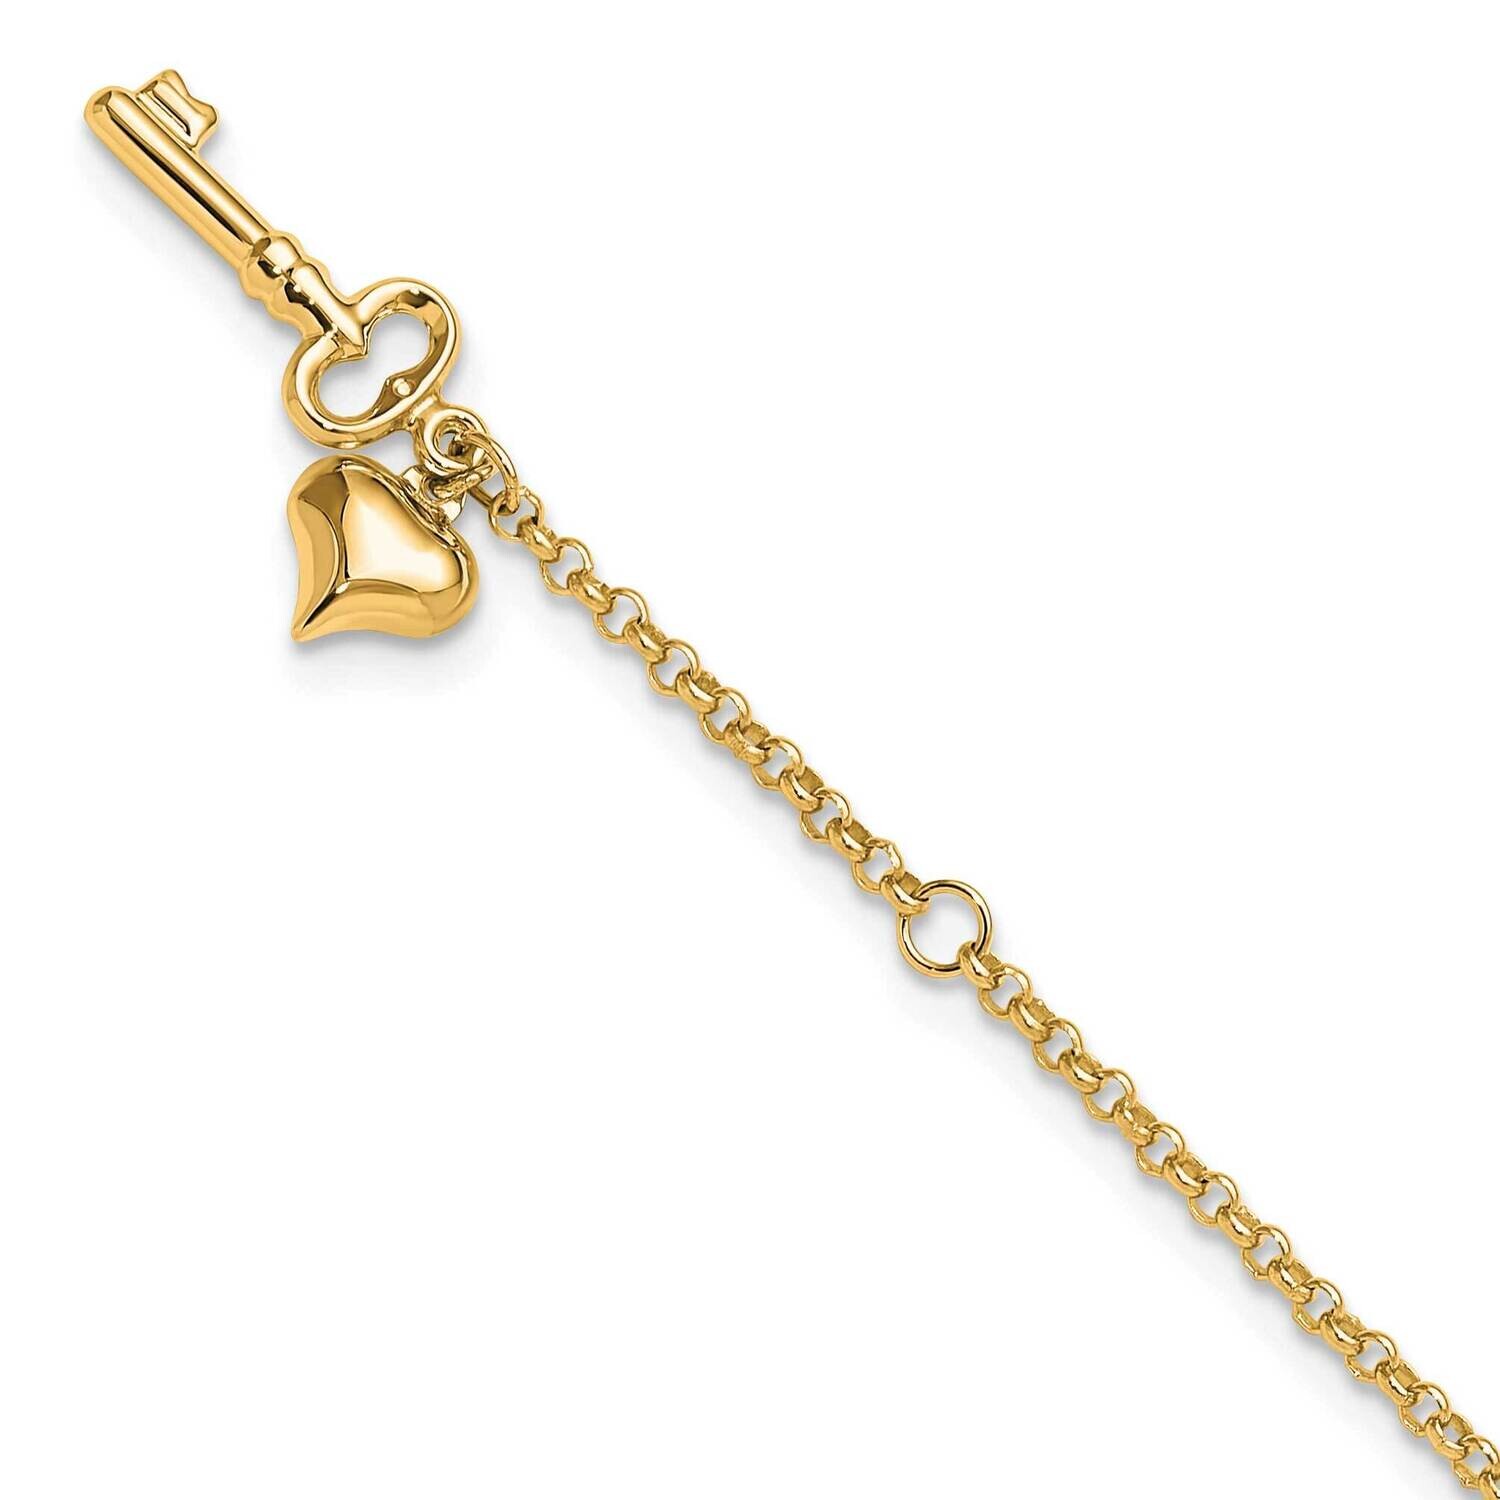 Adjustable Polished Puffed Heart Key 9 Inch Plus 1 Inch Extender Anklet 14k Gold ANK45Y-10